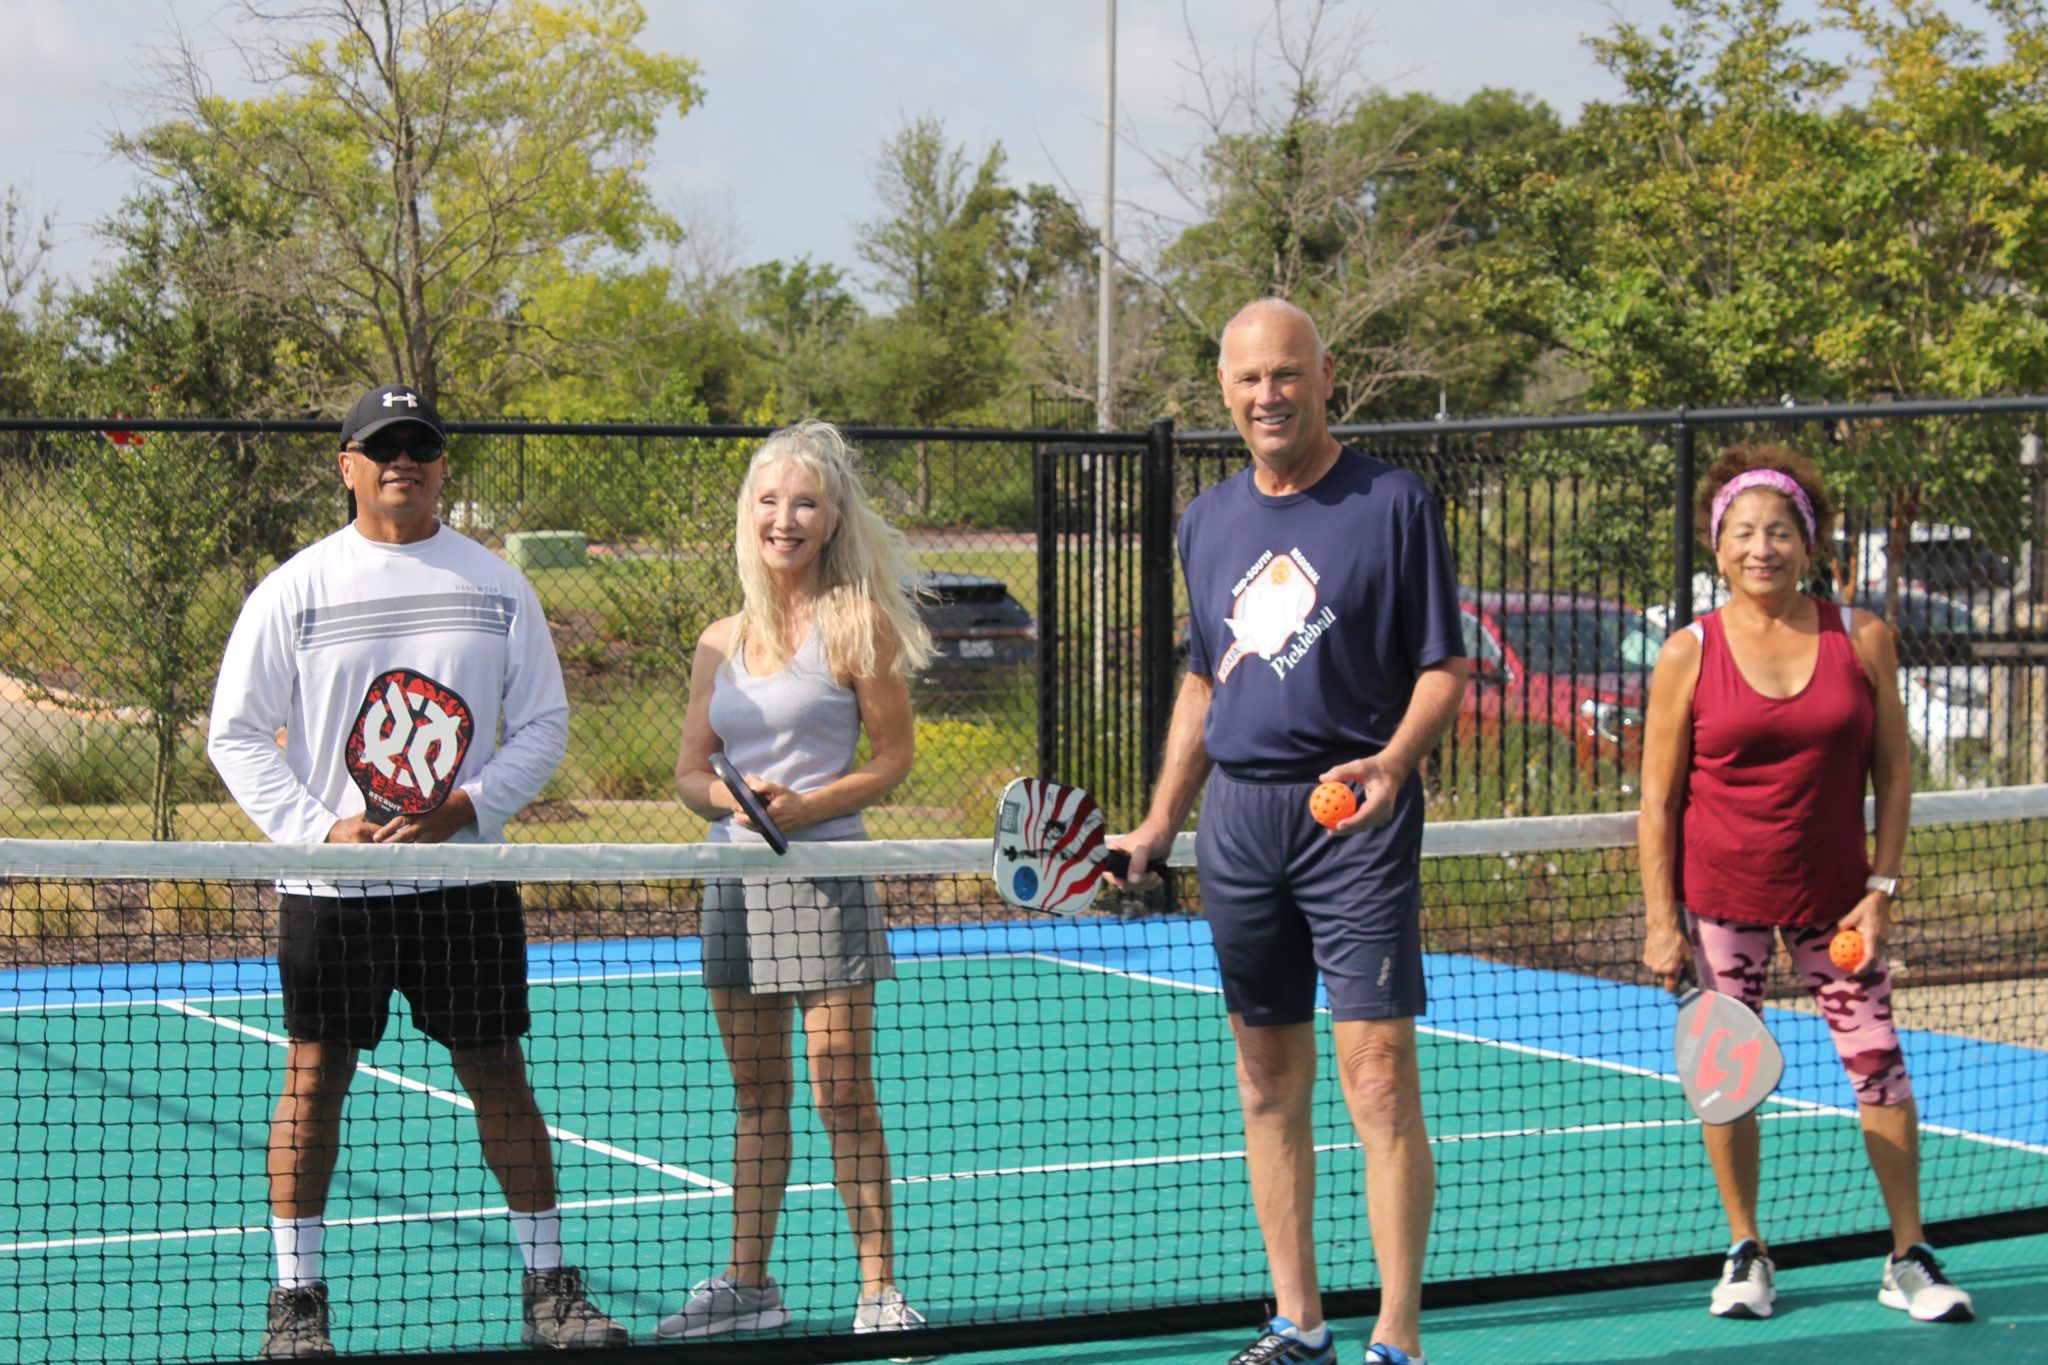 Paddle tennis: characteristics of a dynamic sport full of enthusiasm